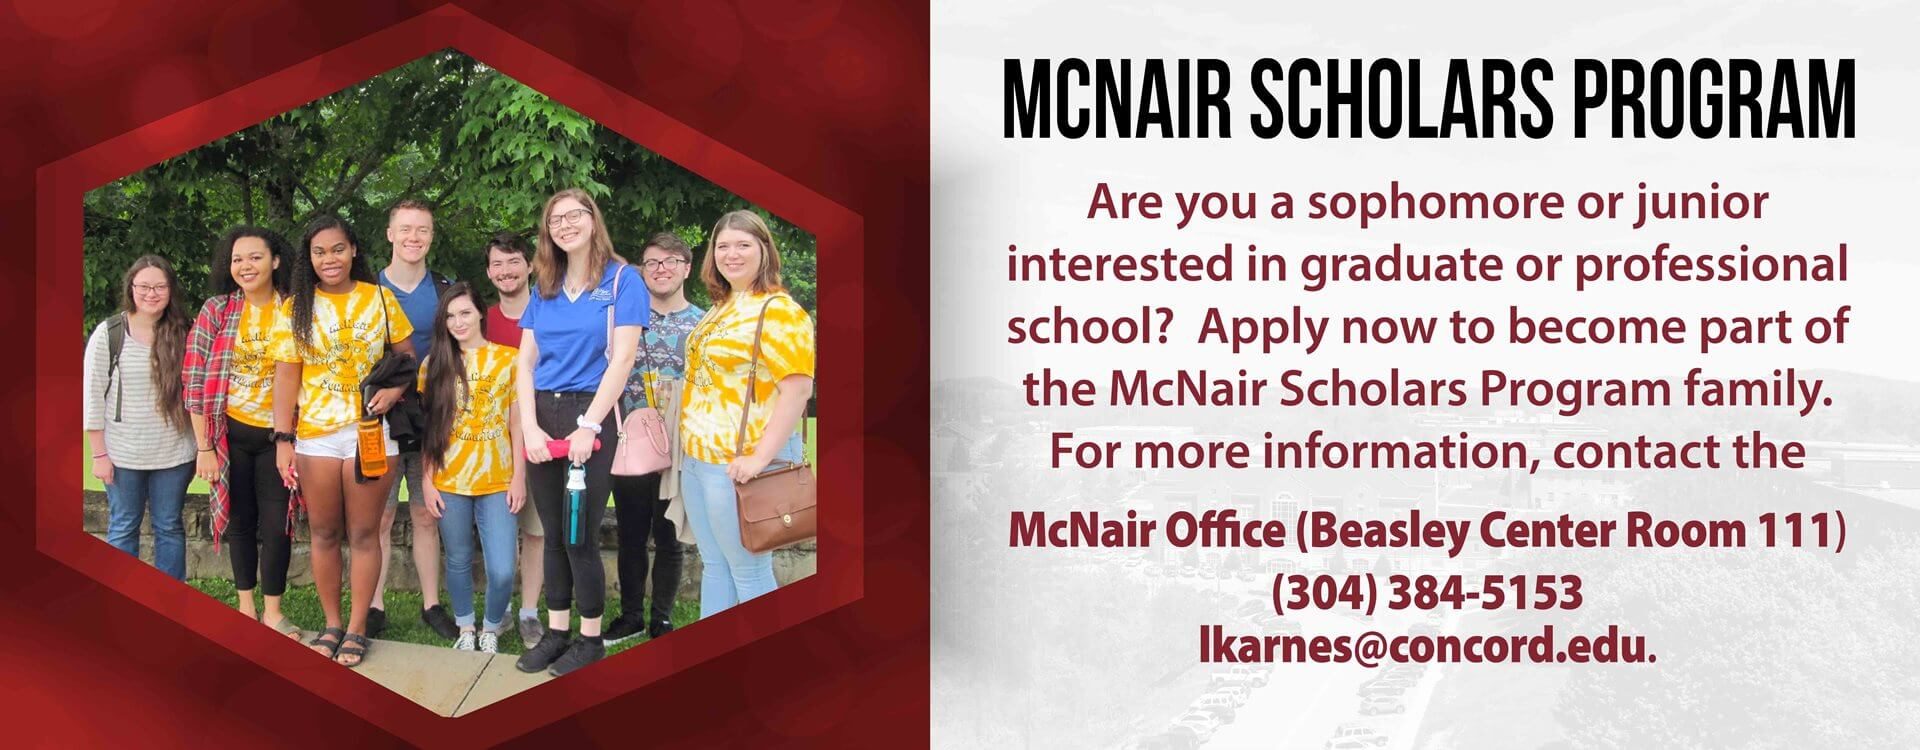 McNair Scholars Program: are you a sophomore or junior interested in graduate or professional school? Apply now to become part of the McNair scholars program family! For more information, click here